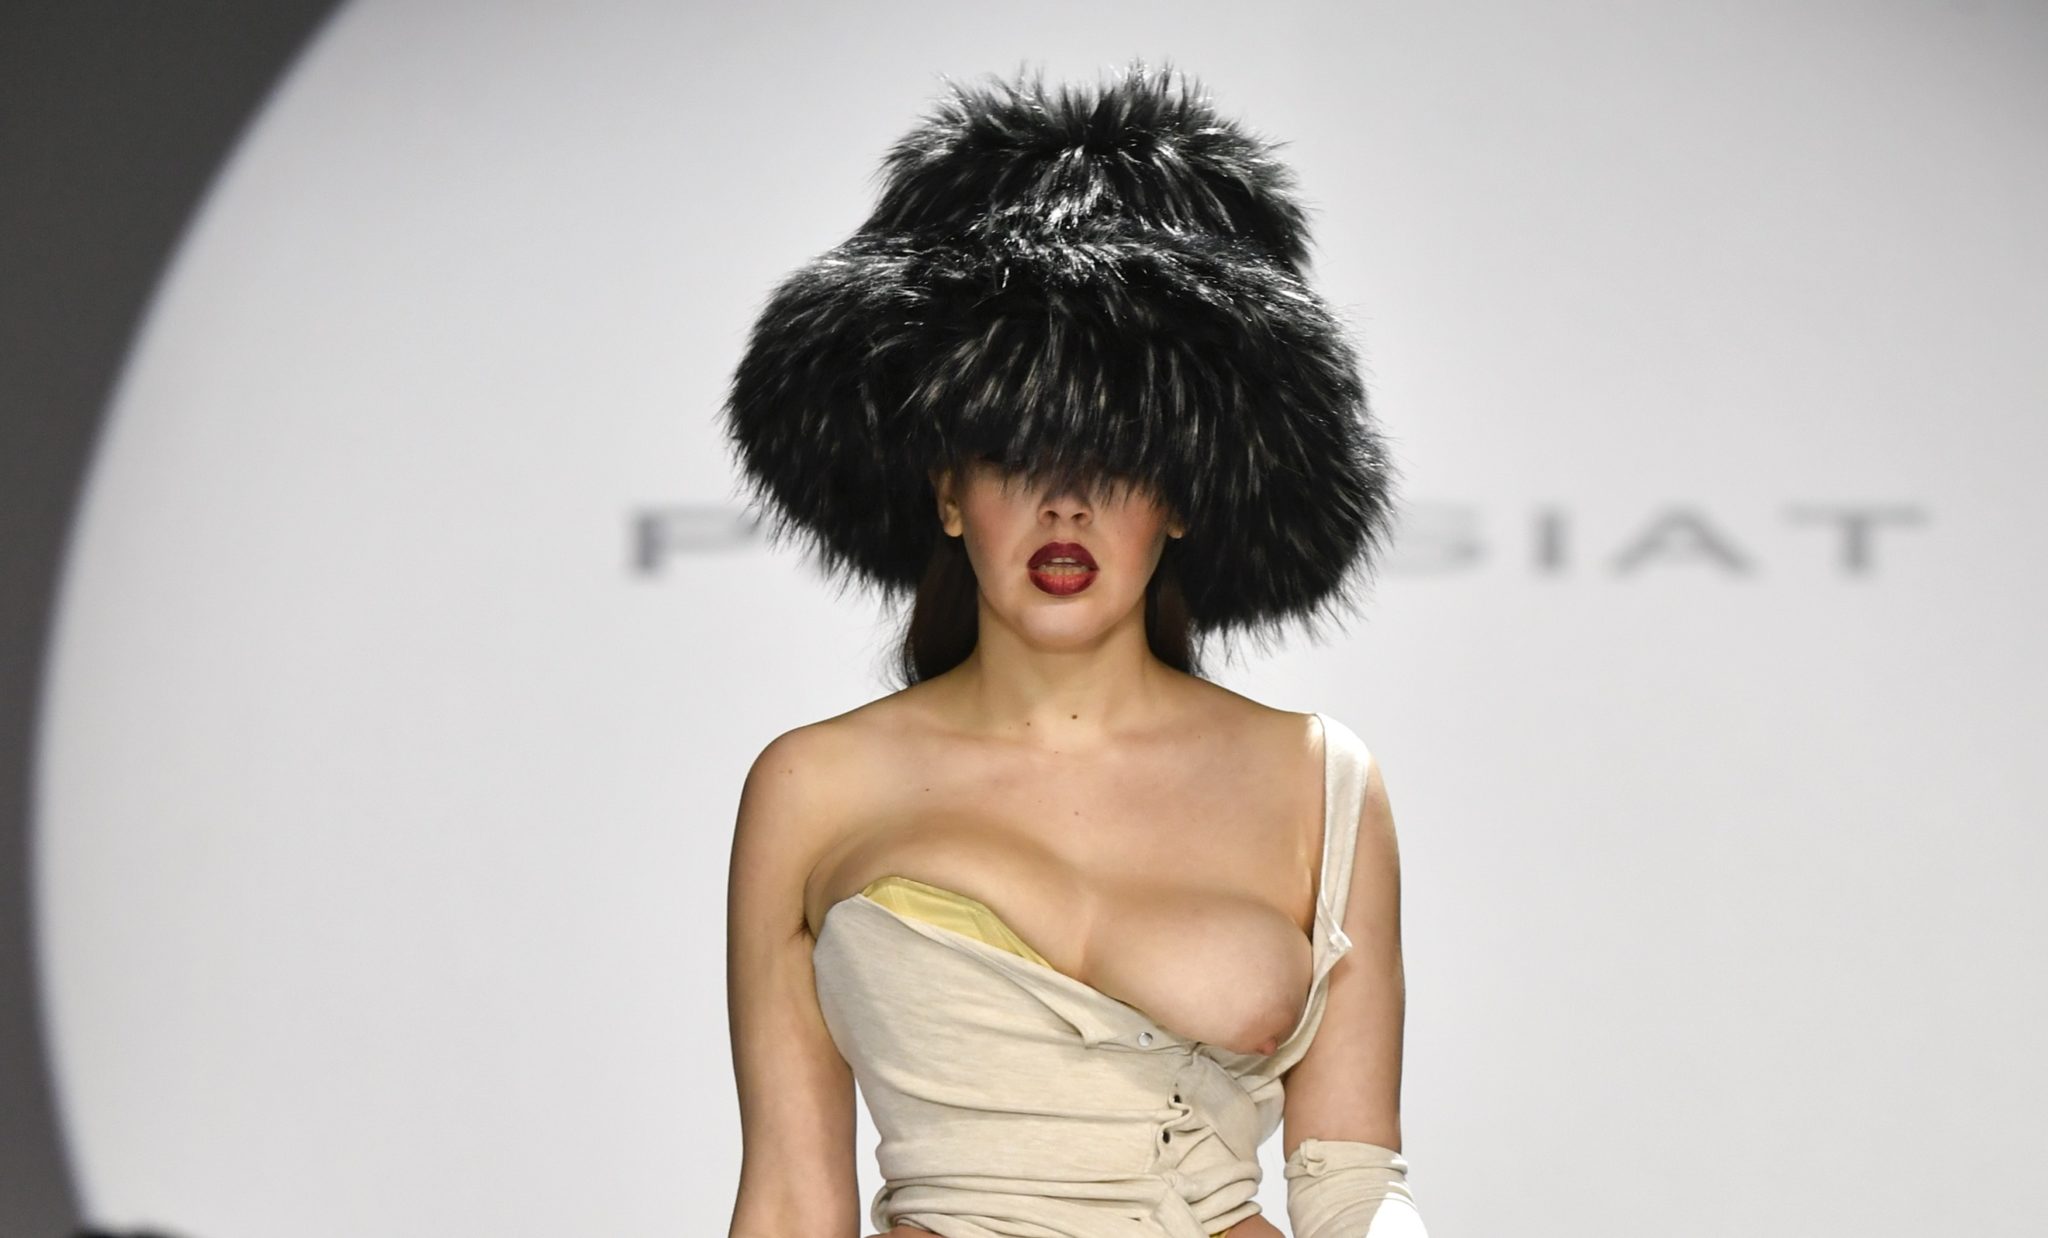 https://ashadedviewonfashion.com/wp-content/uploads/2022/03/ashadedviewonfashion.com-exaggerated-shapes-and-nipple-cleavage-at-pressait-pfw-fw-2223-text-by-leticia-dare-pressait-f.jpg